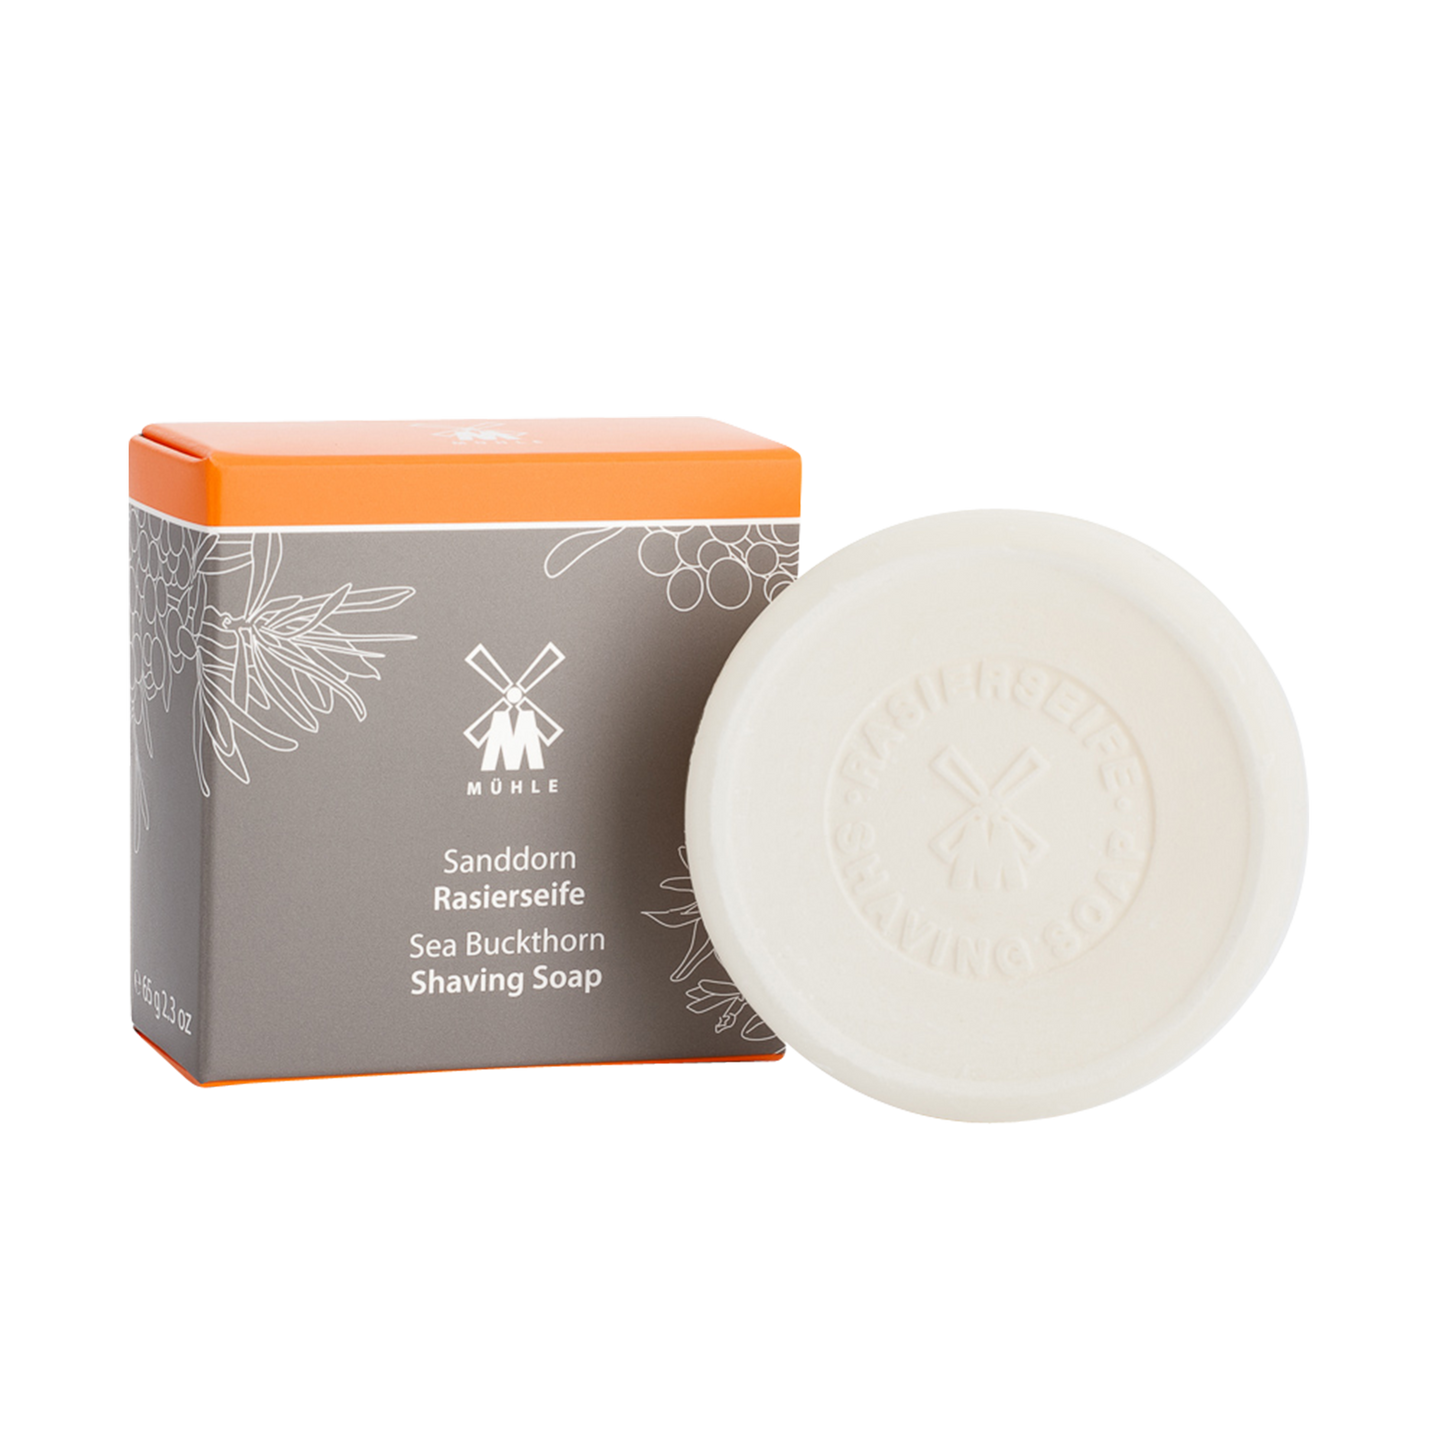 MUHLE Sea Buckthorn Shaving Soap: Since the 18th century, shaving soaps have established themselves as essential care products for wet shaving. The shaving soap develops a lightly scented and nurturing lather. Gently calming and revitalizing, this Shaving Soap's signature scent is obtained from plants in various coastal areas. Sea buckthorn is rich in palmitic acid, supporting the natural regeneration of your skin's cell structure. Citrus and fresh, this fragrance contains fine notes of lime and orange.